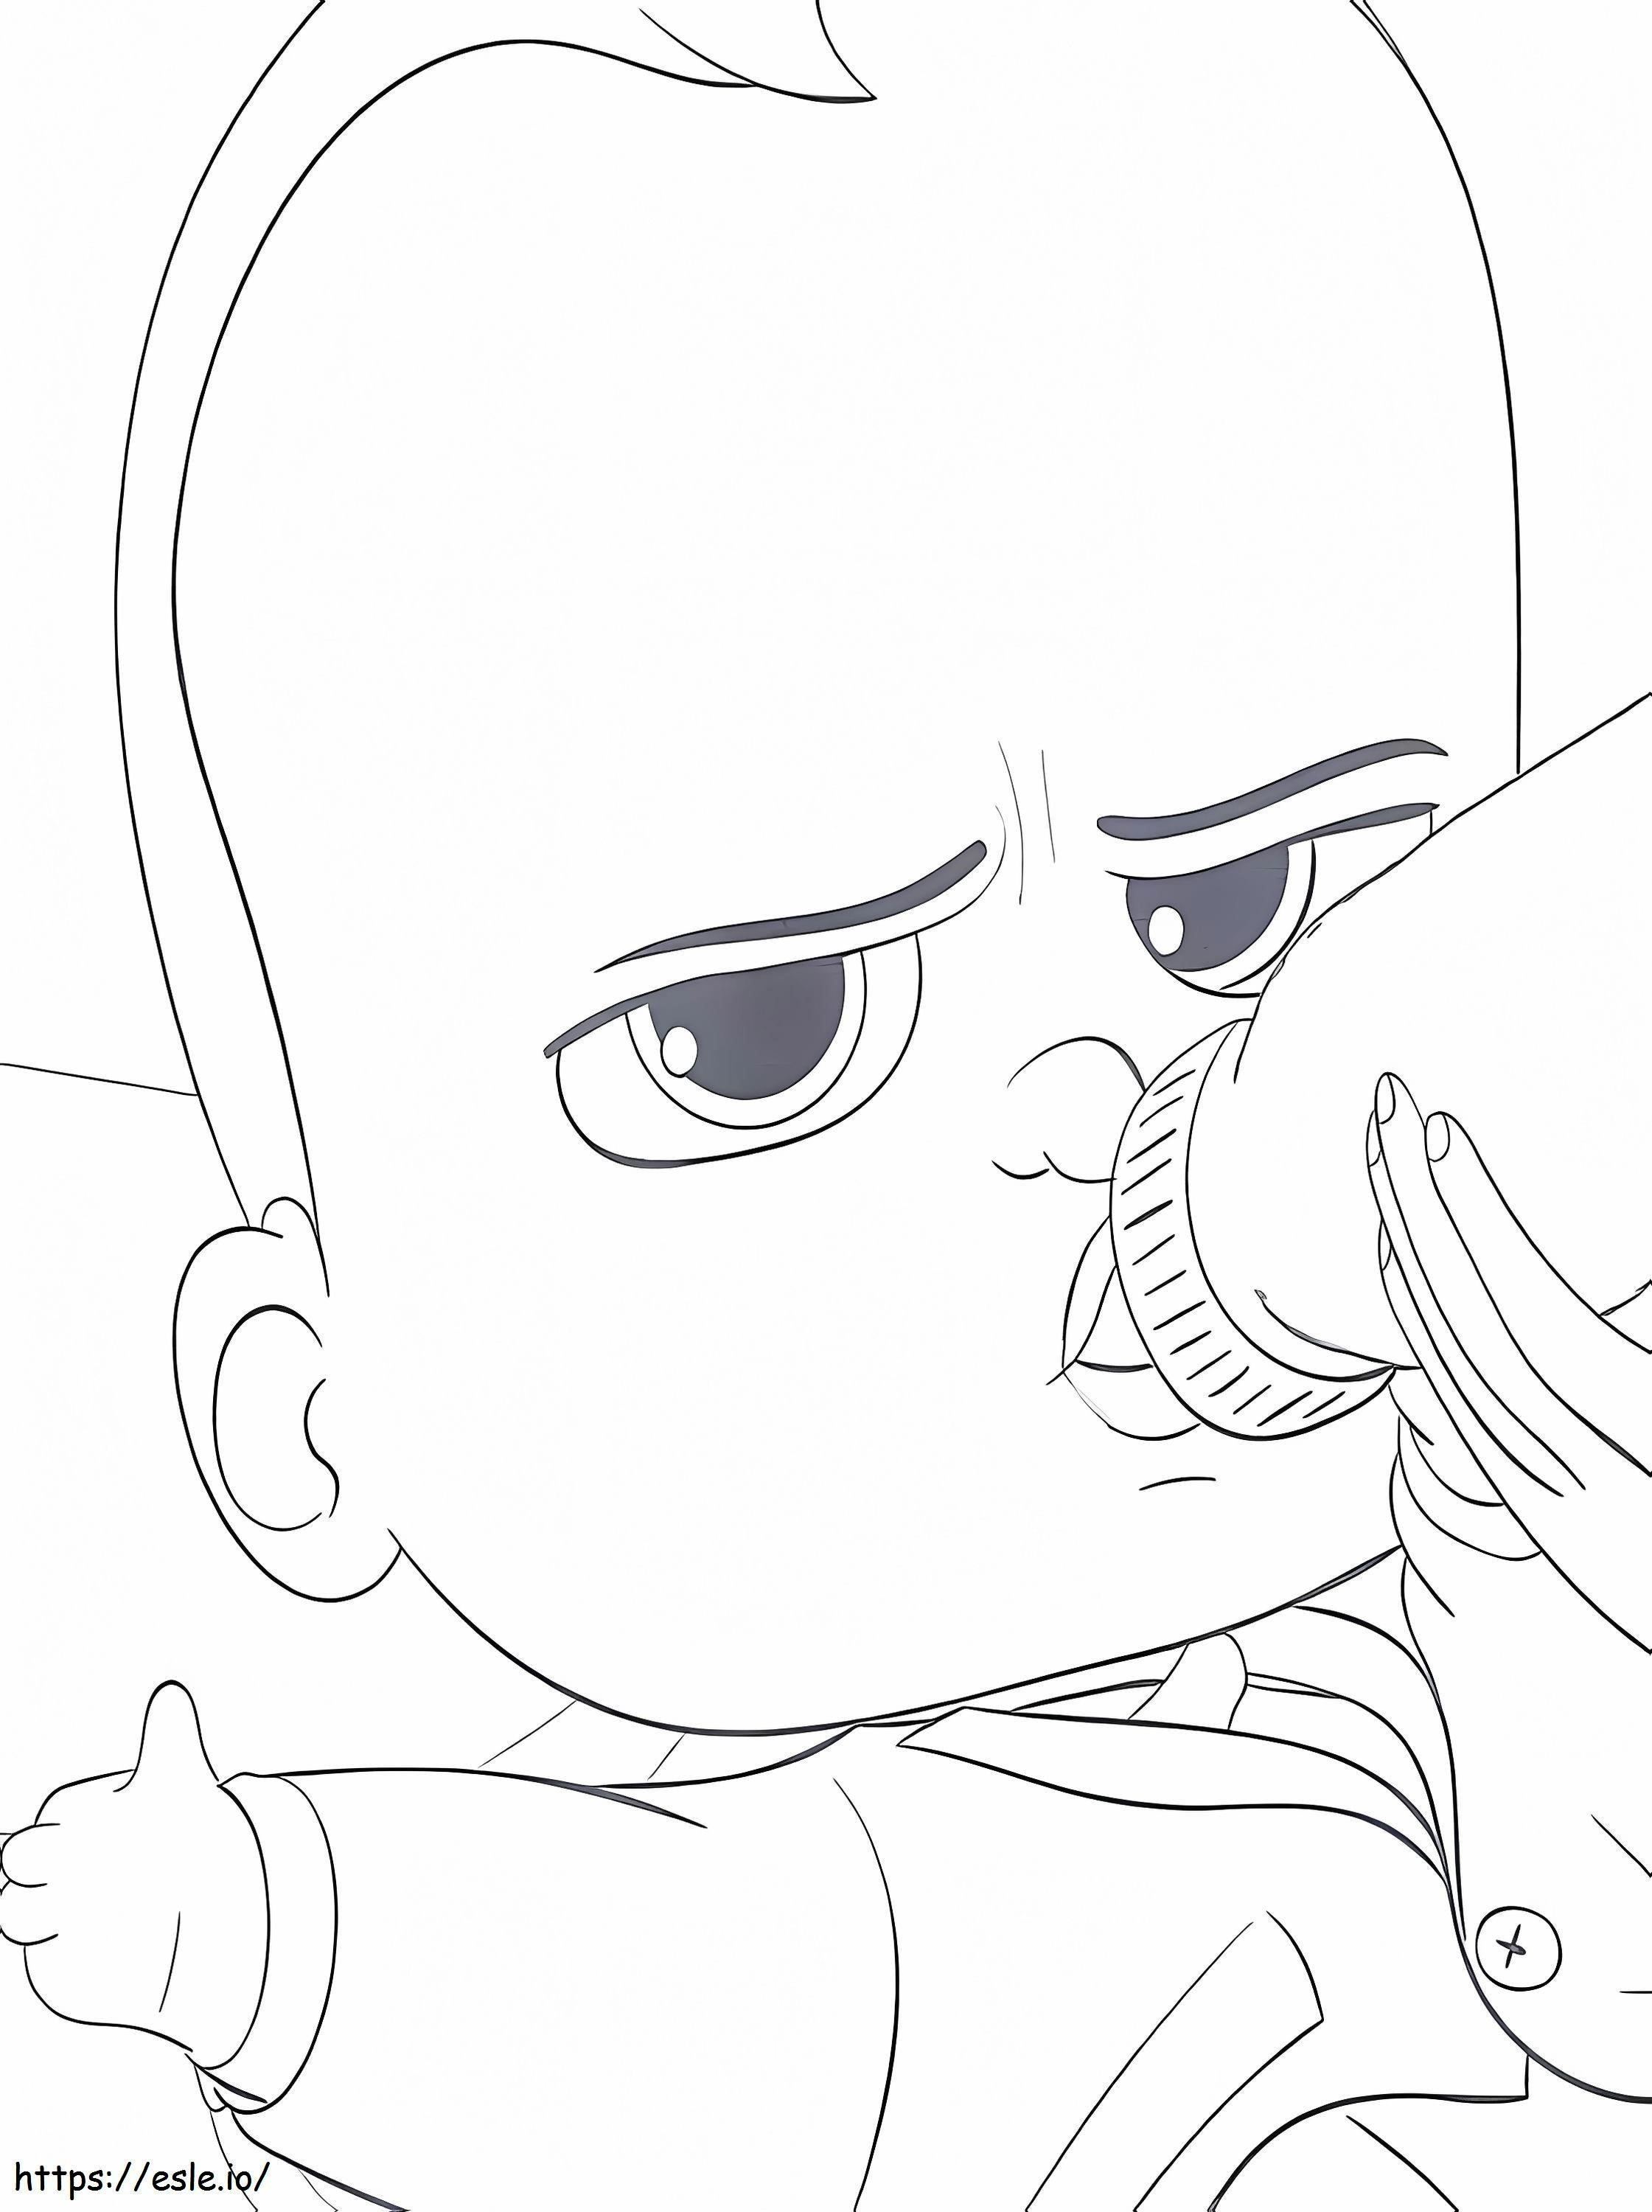 1559696512 Boss Baby Drink Milk A4 coloring page